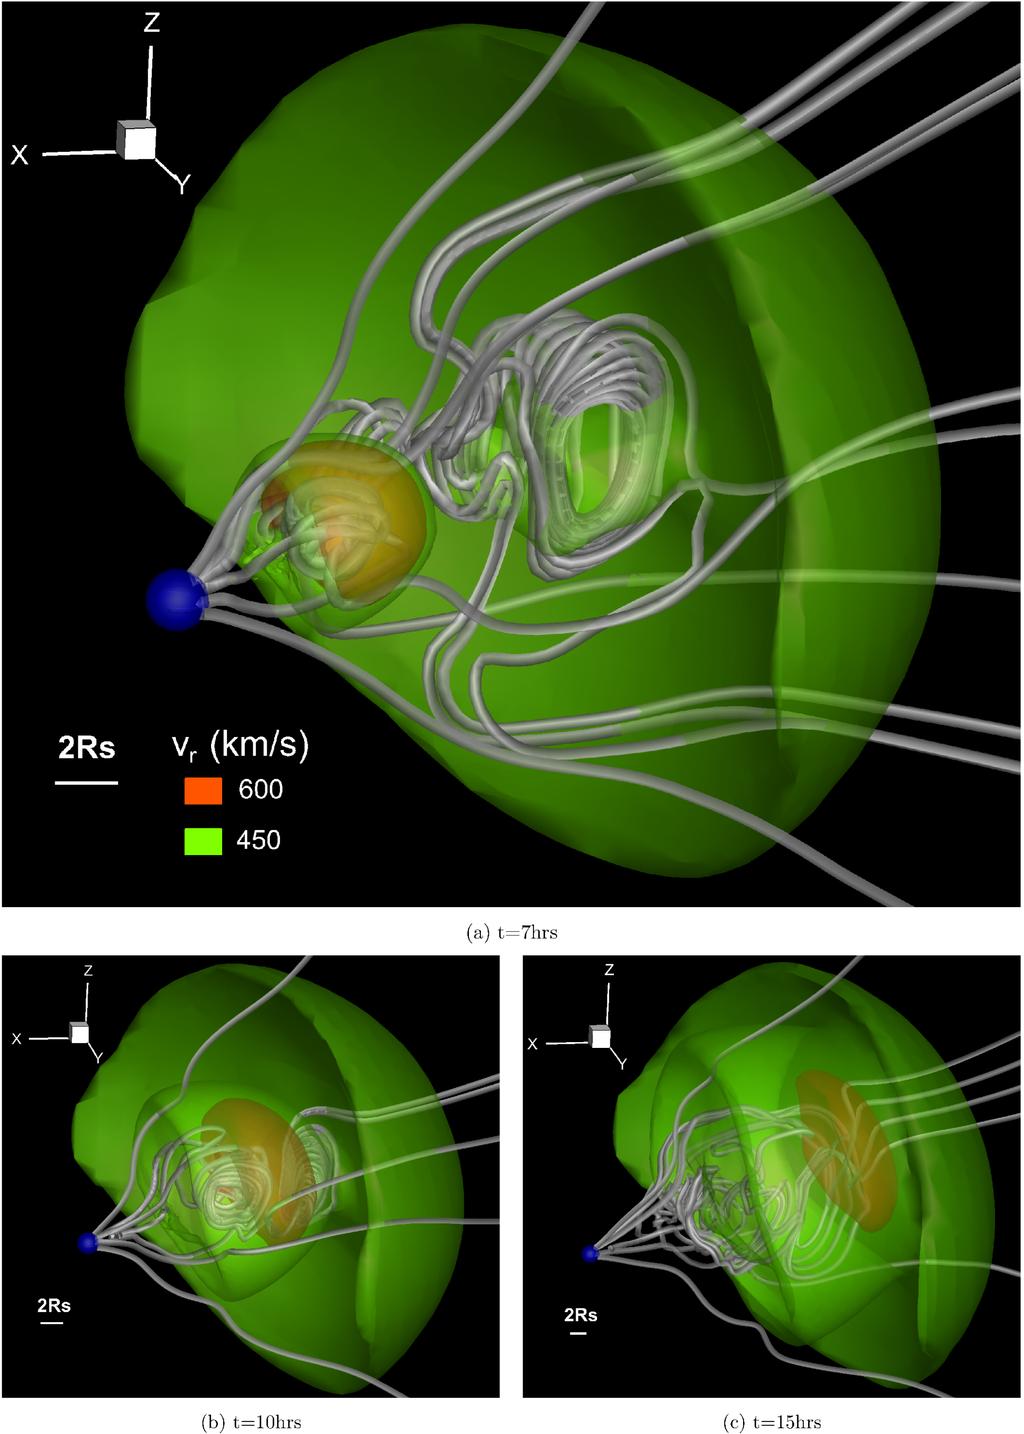 176 Shen et al. Figure 1. Radial velocity map of the two CMEs at the time of 7, 10, and 15 hours.